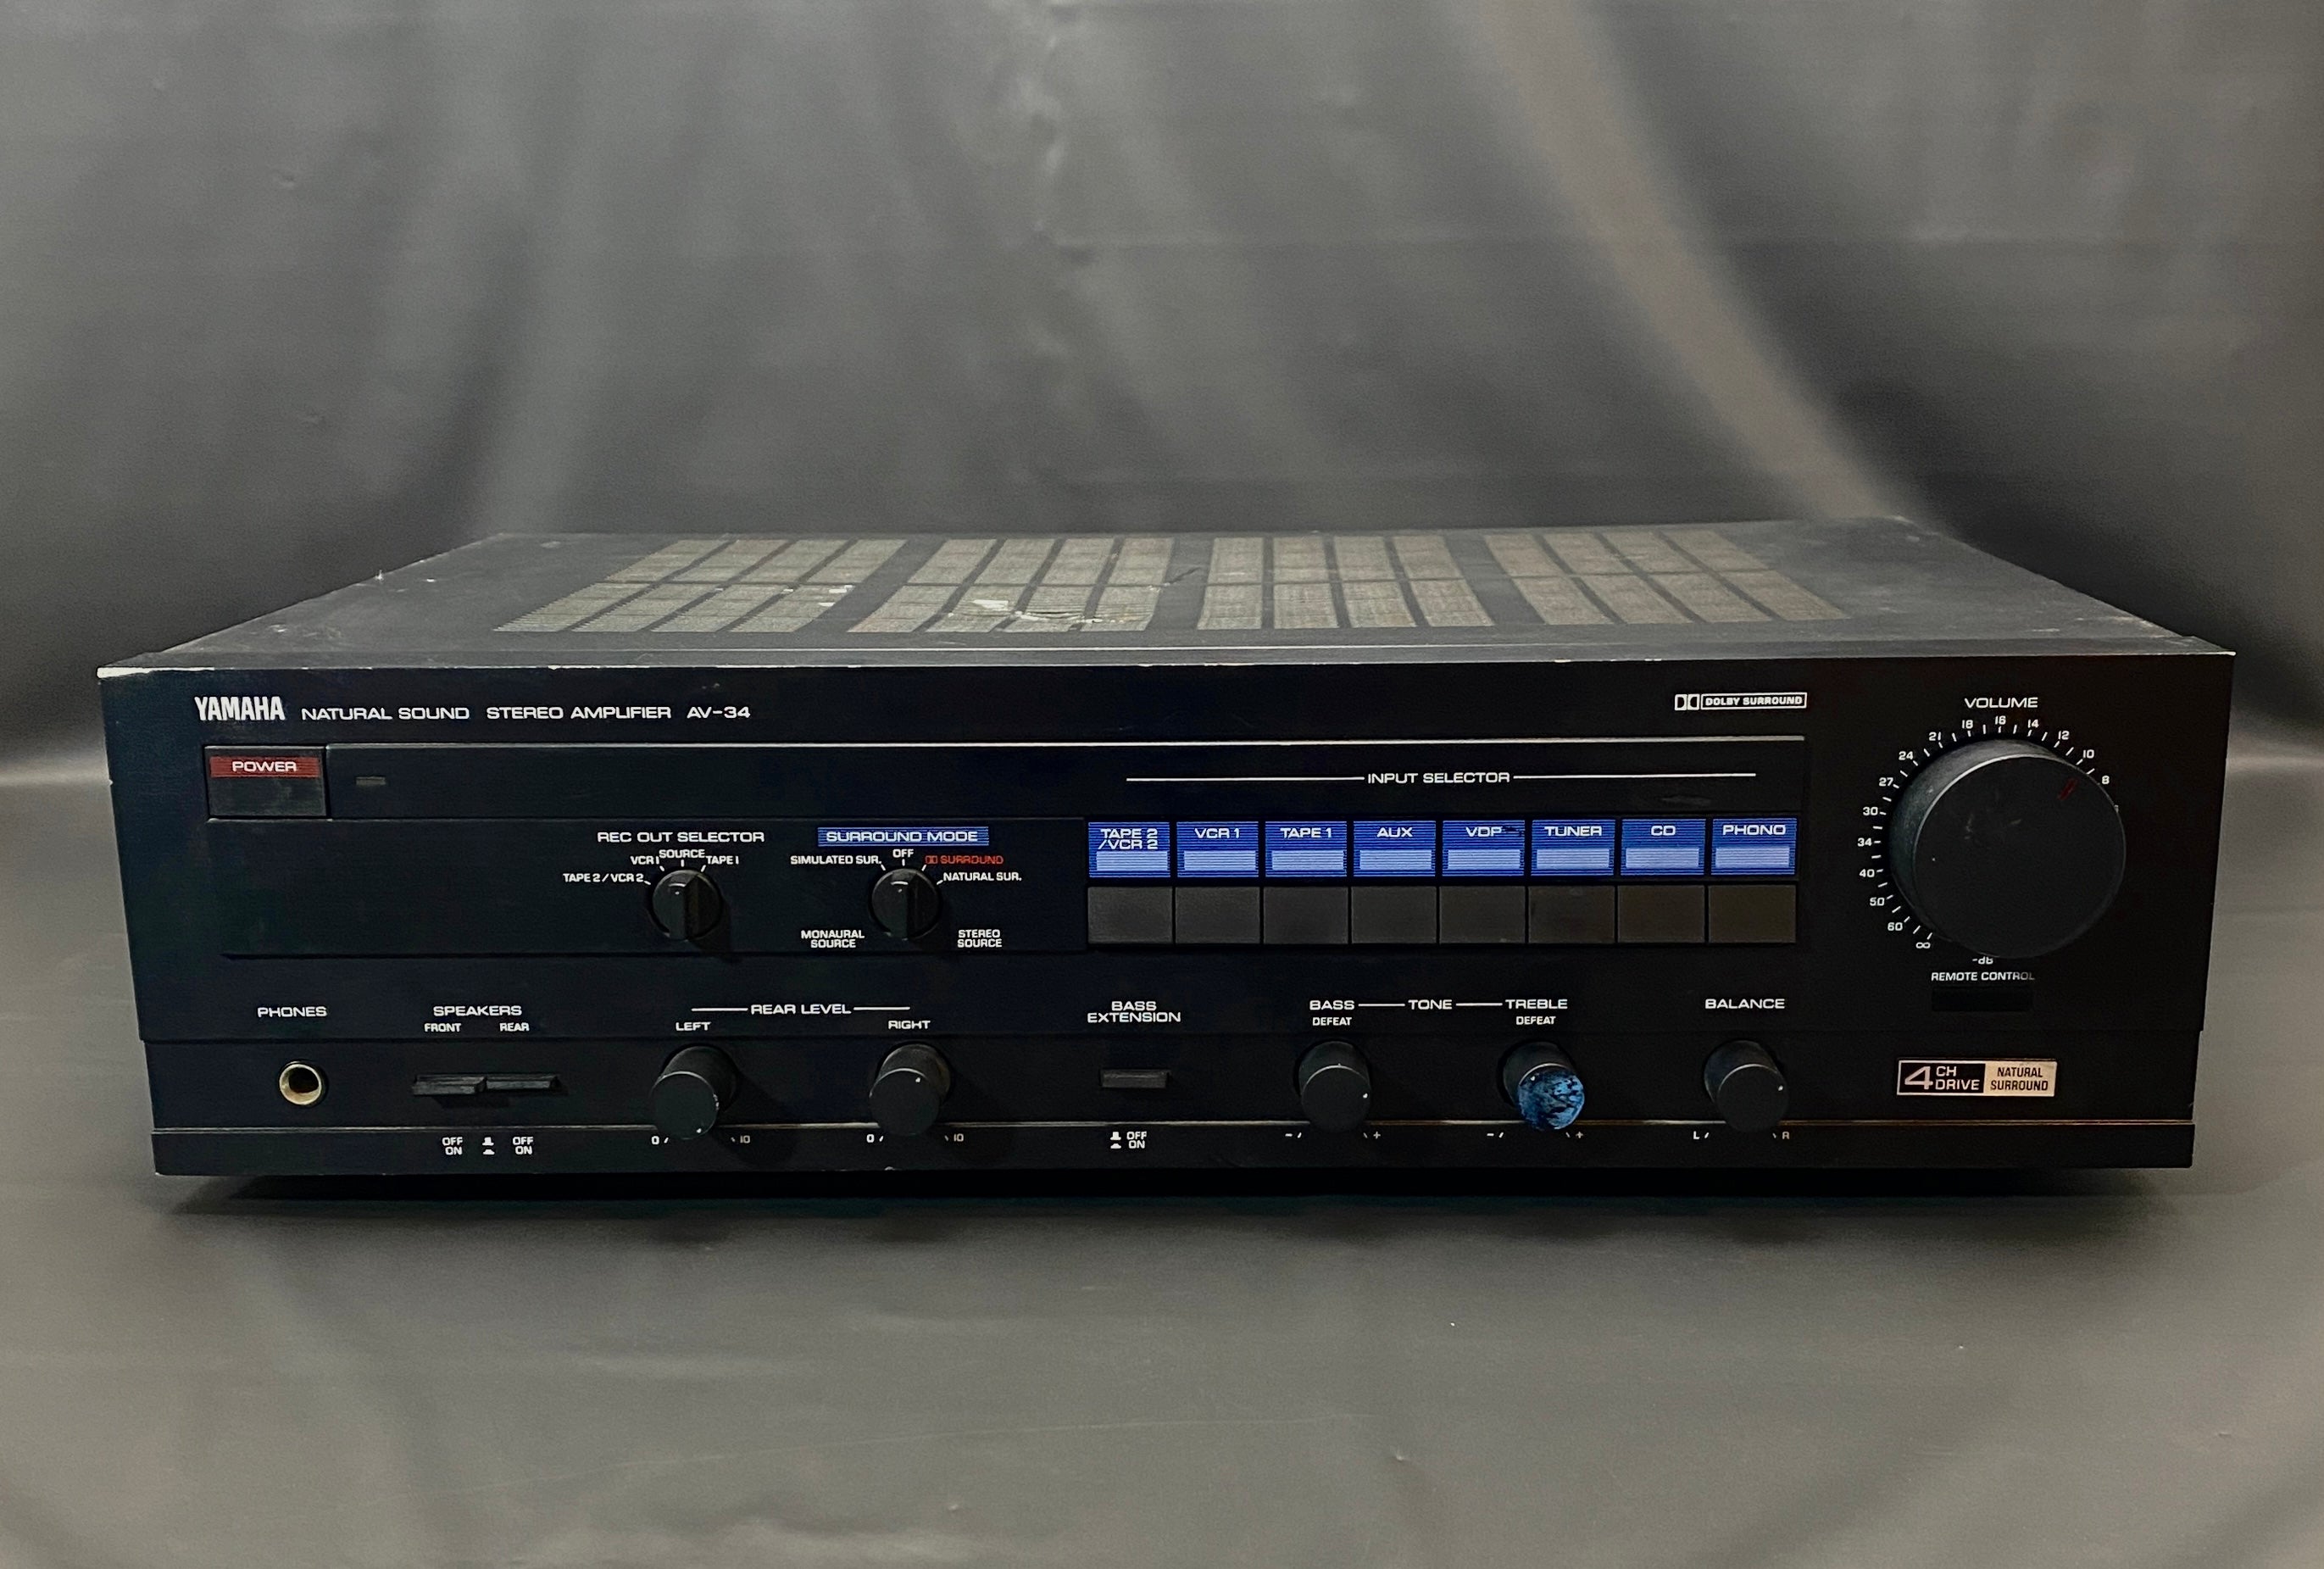 Yamaha Av-34 Vintage 1980s 2 Ch A/V Stereo Receiver Home Audio Amplifier Tested!